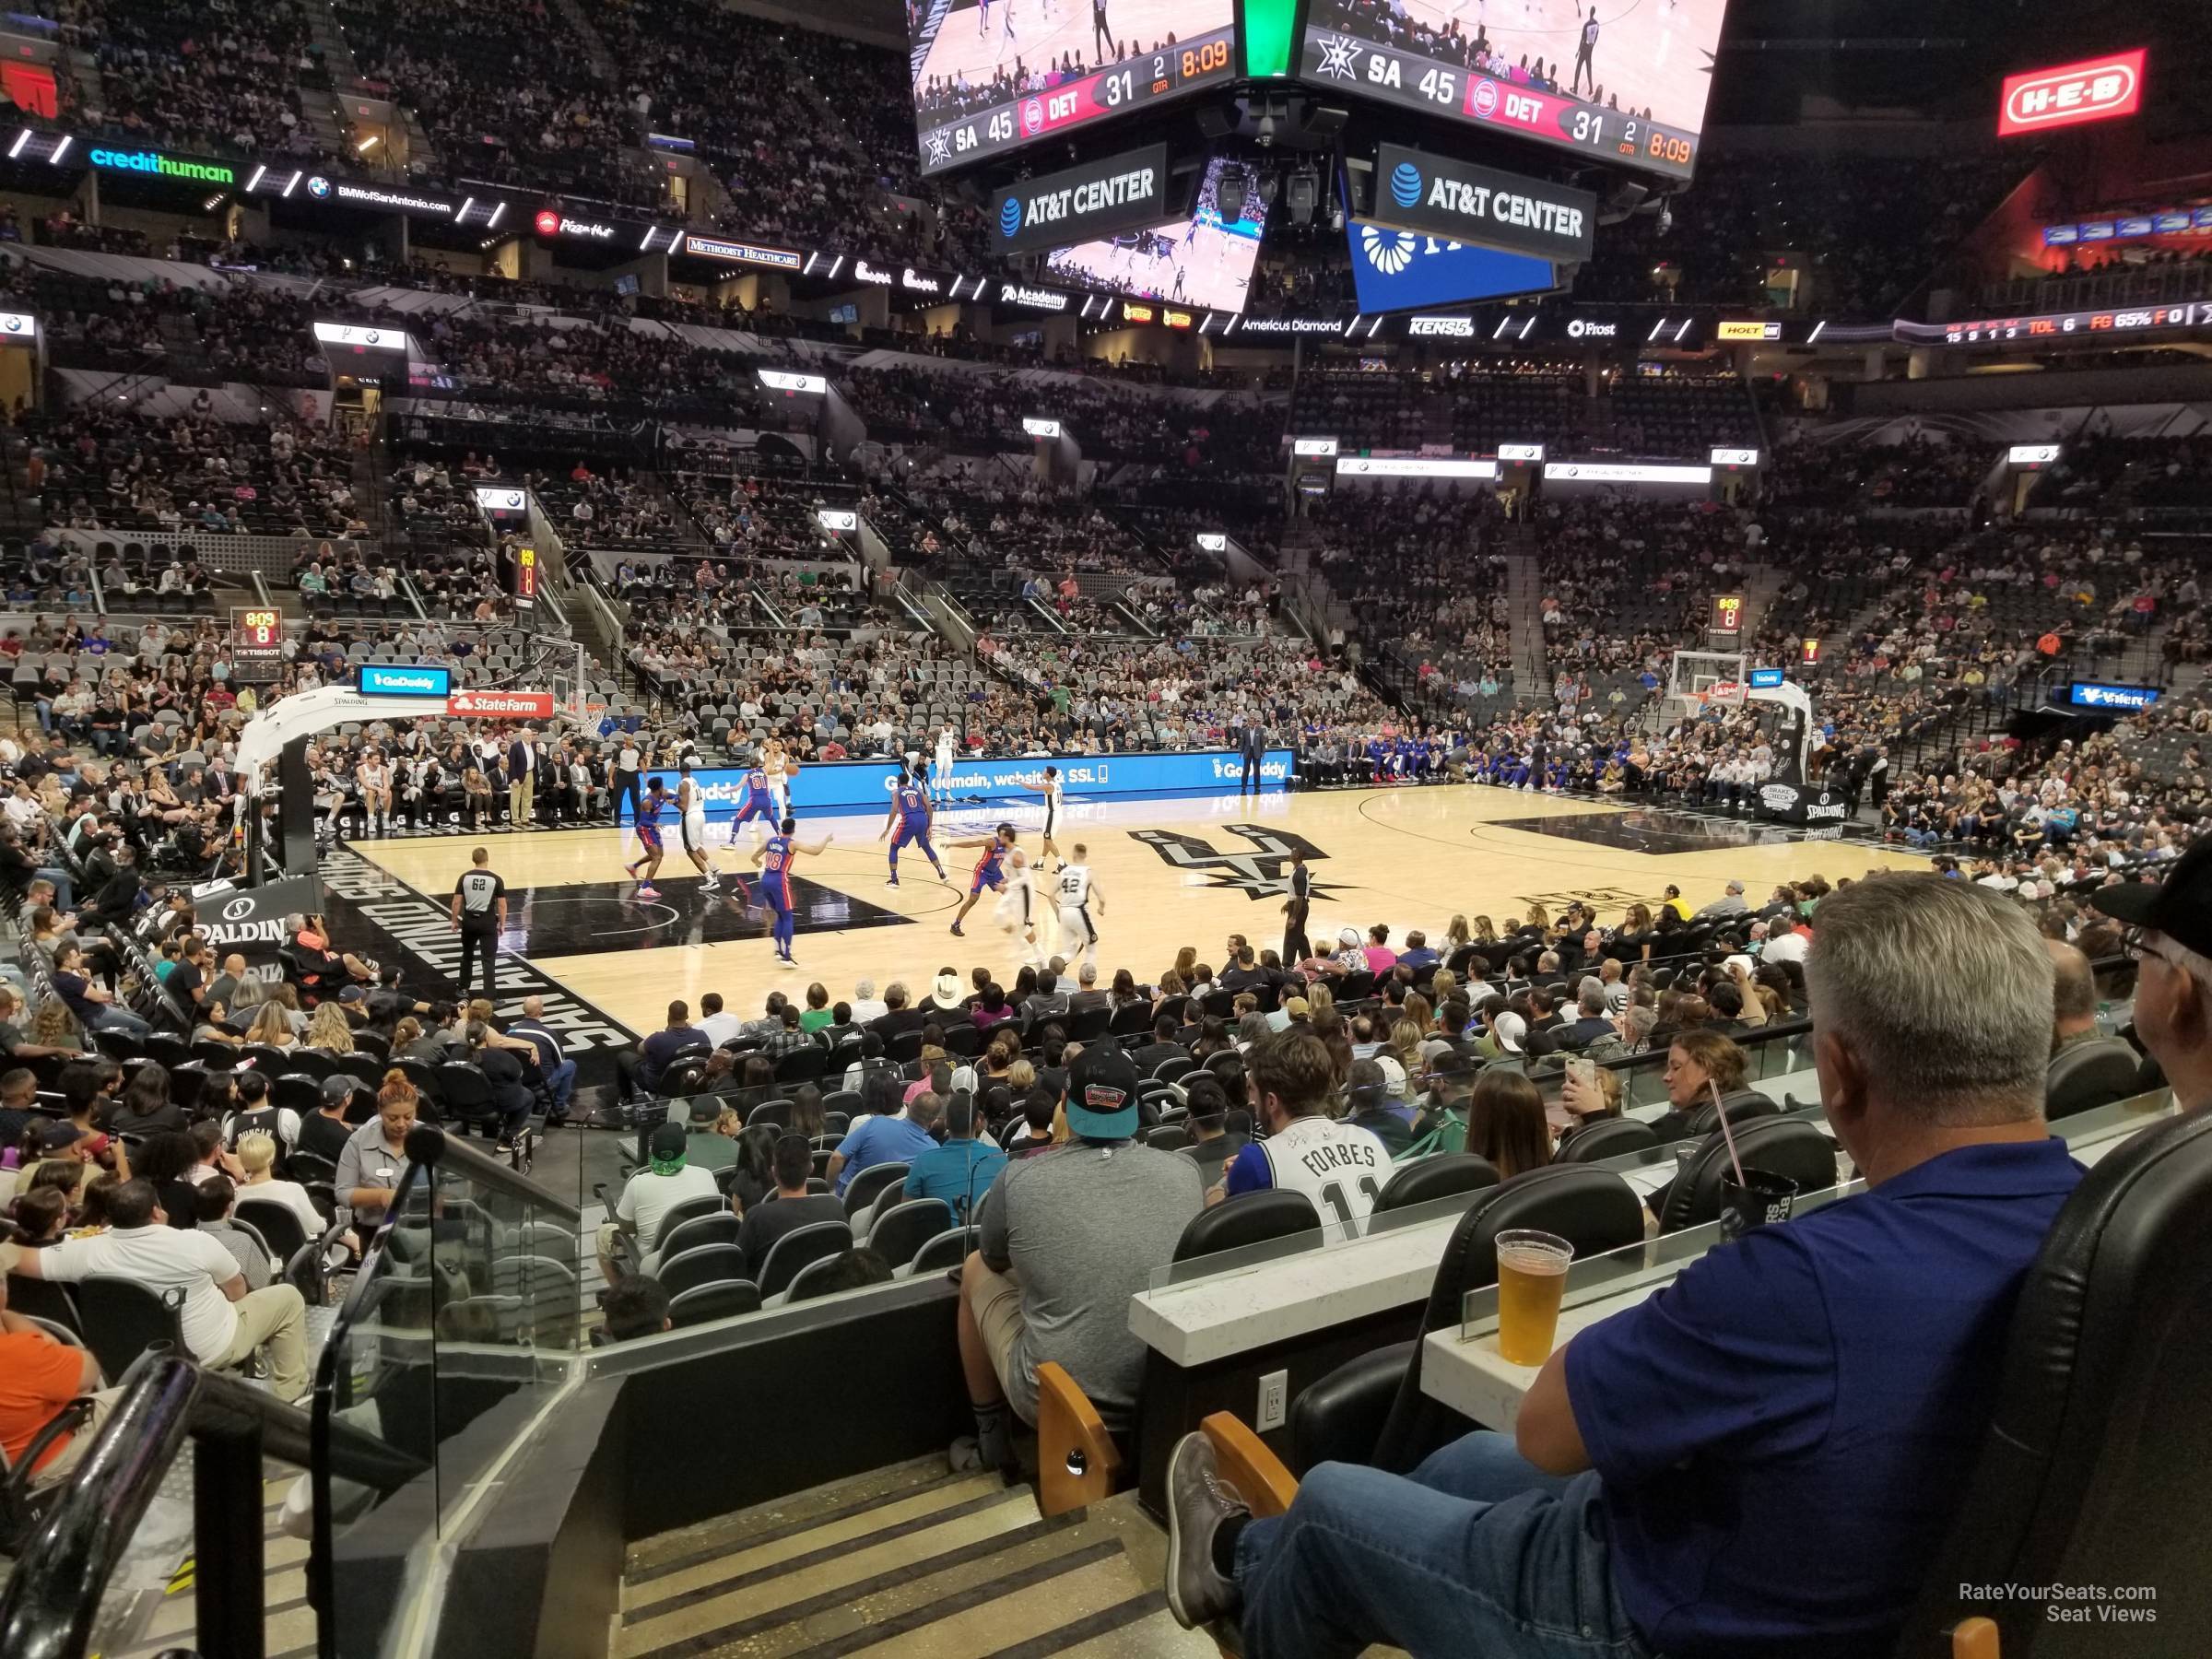 section 28, row 5 seat view  for basketball - at&t center